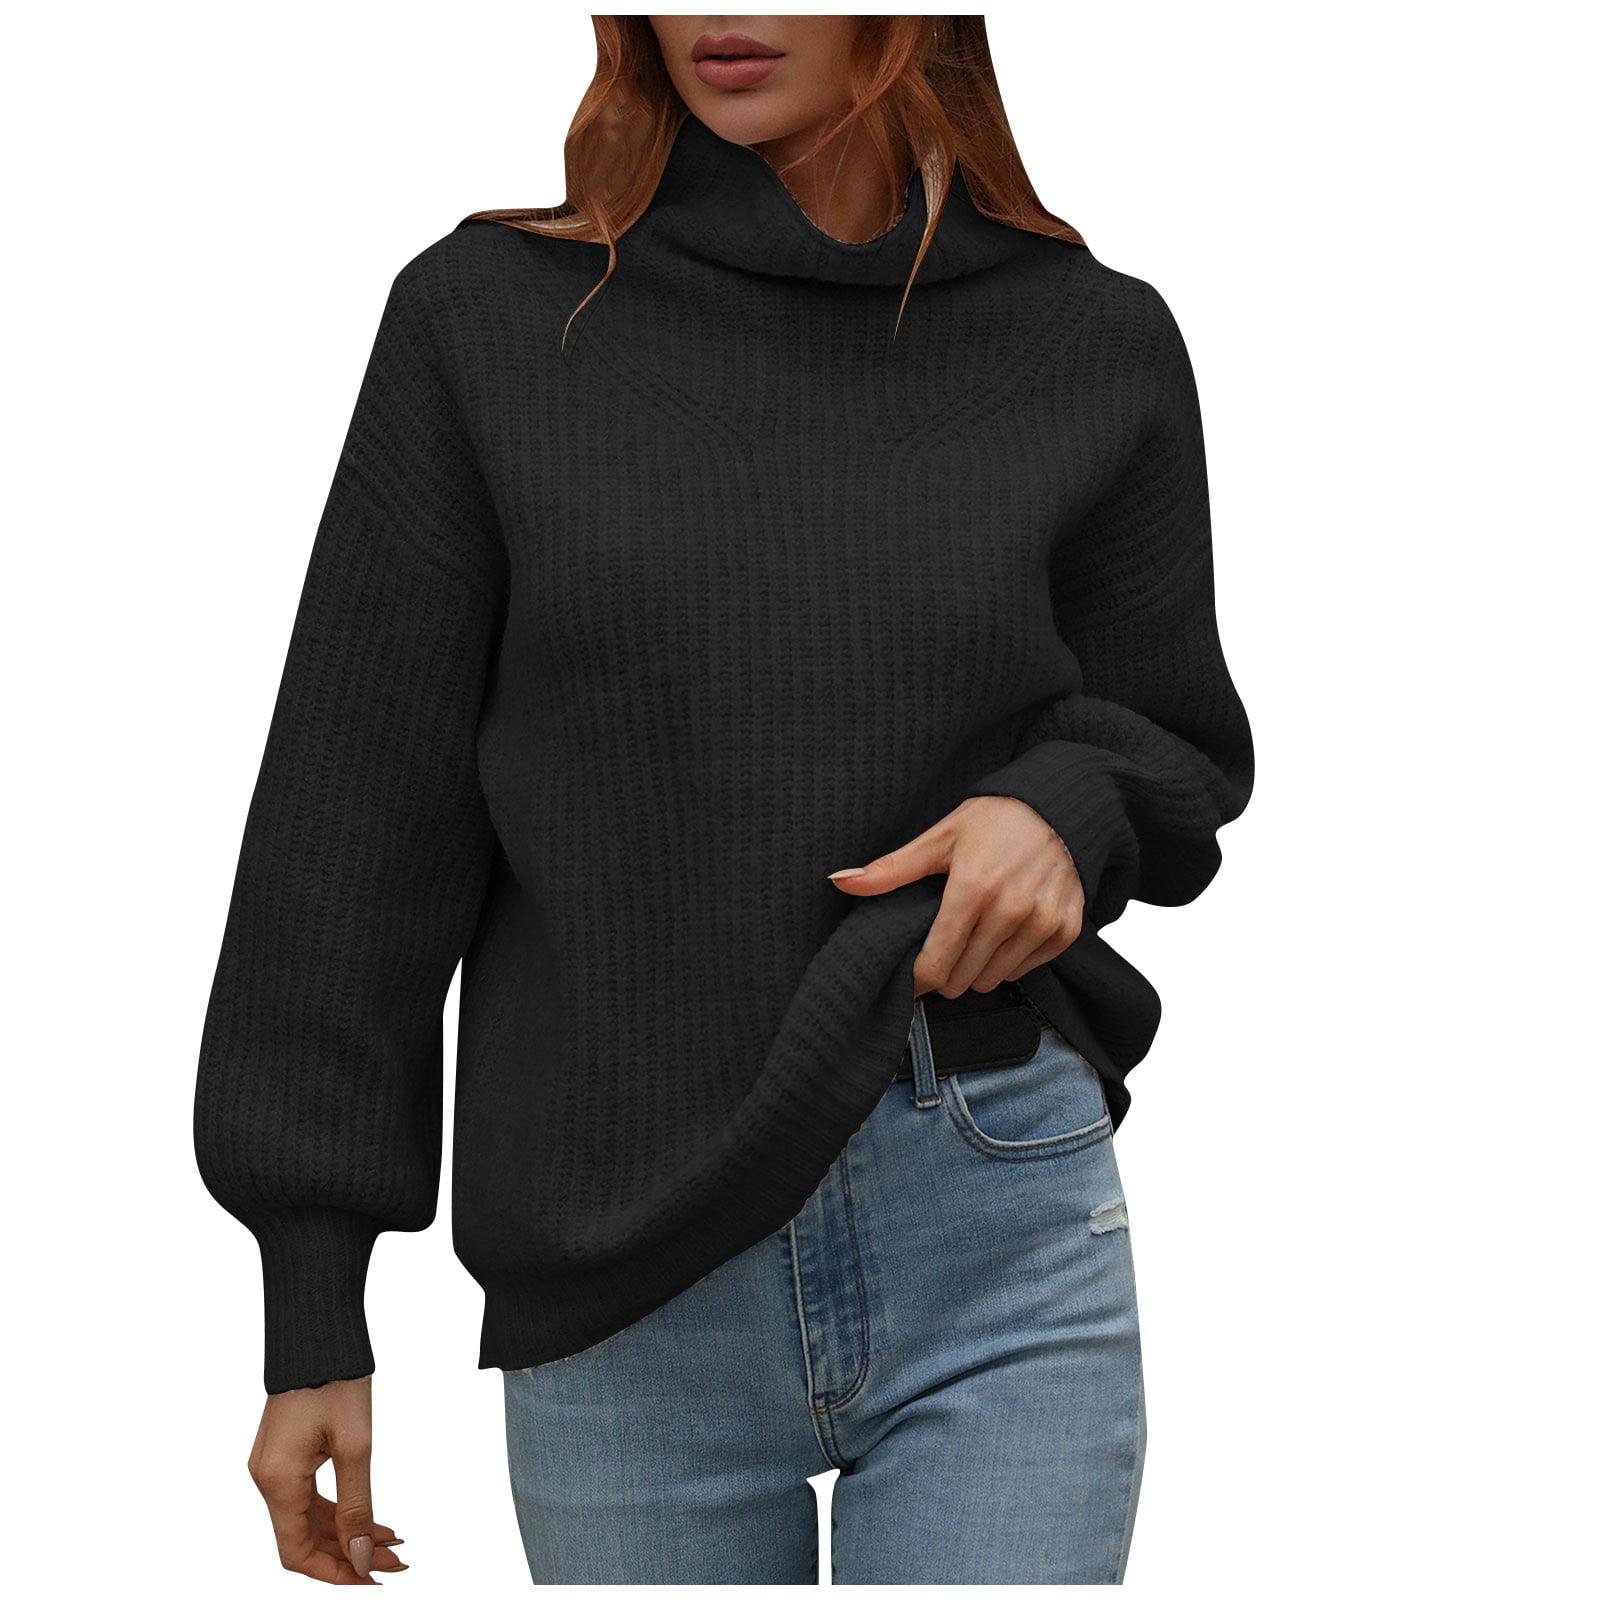  JIOEEH Sweater Coats for Women Fit Mid Long Double womens  crewneck sweatshirt girl stuff under 5 dollars bulk tshirts for printing  wholesale clearance maternity clothes $1 stuff deal of the Black 